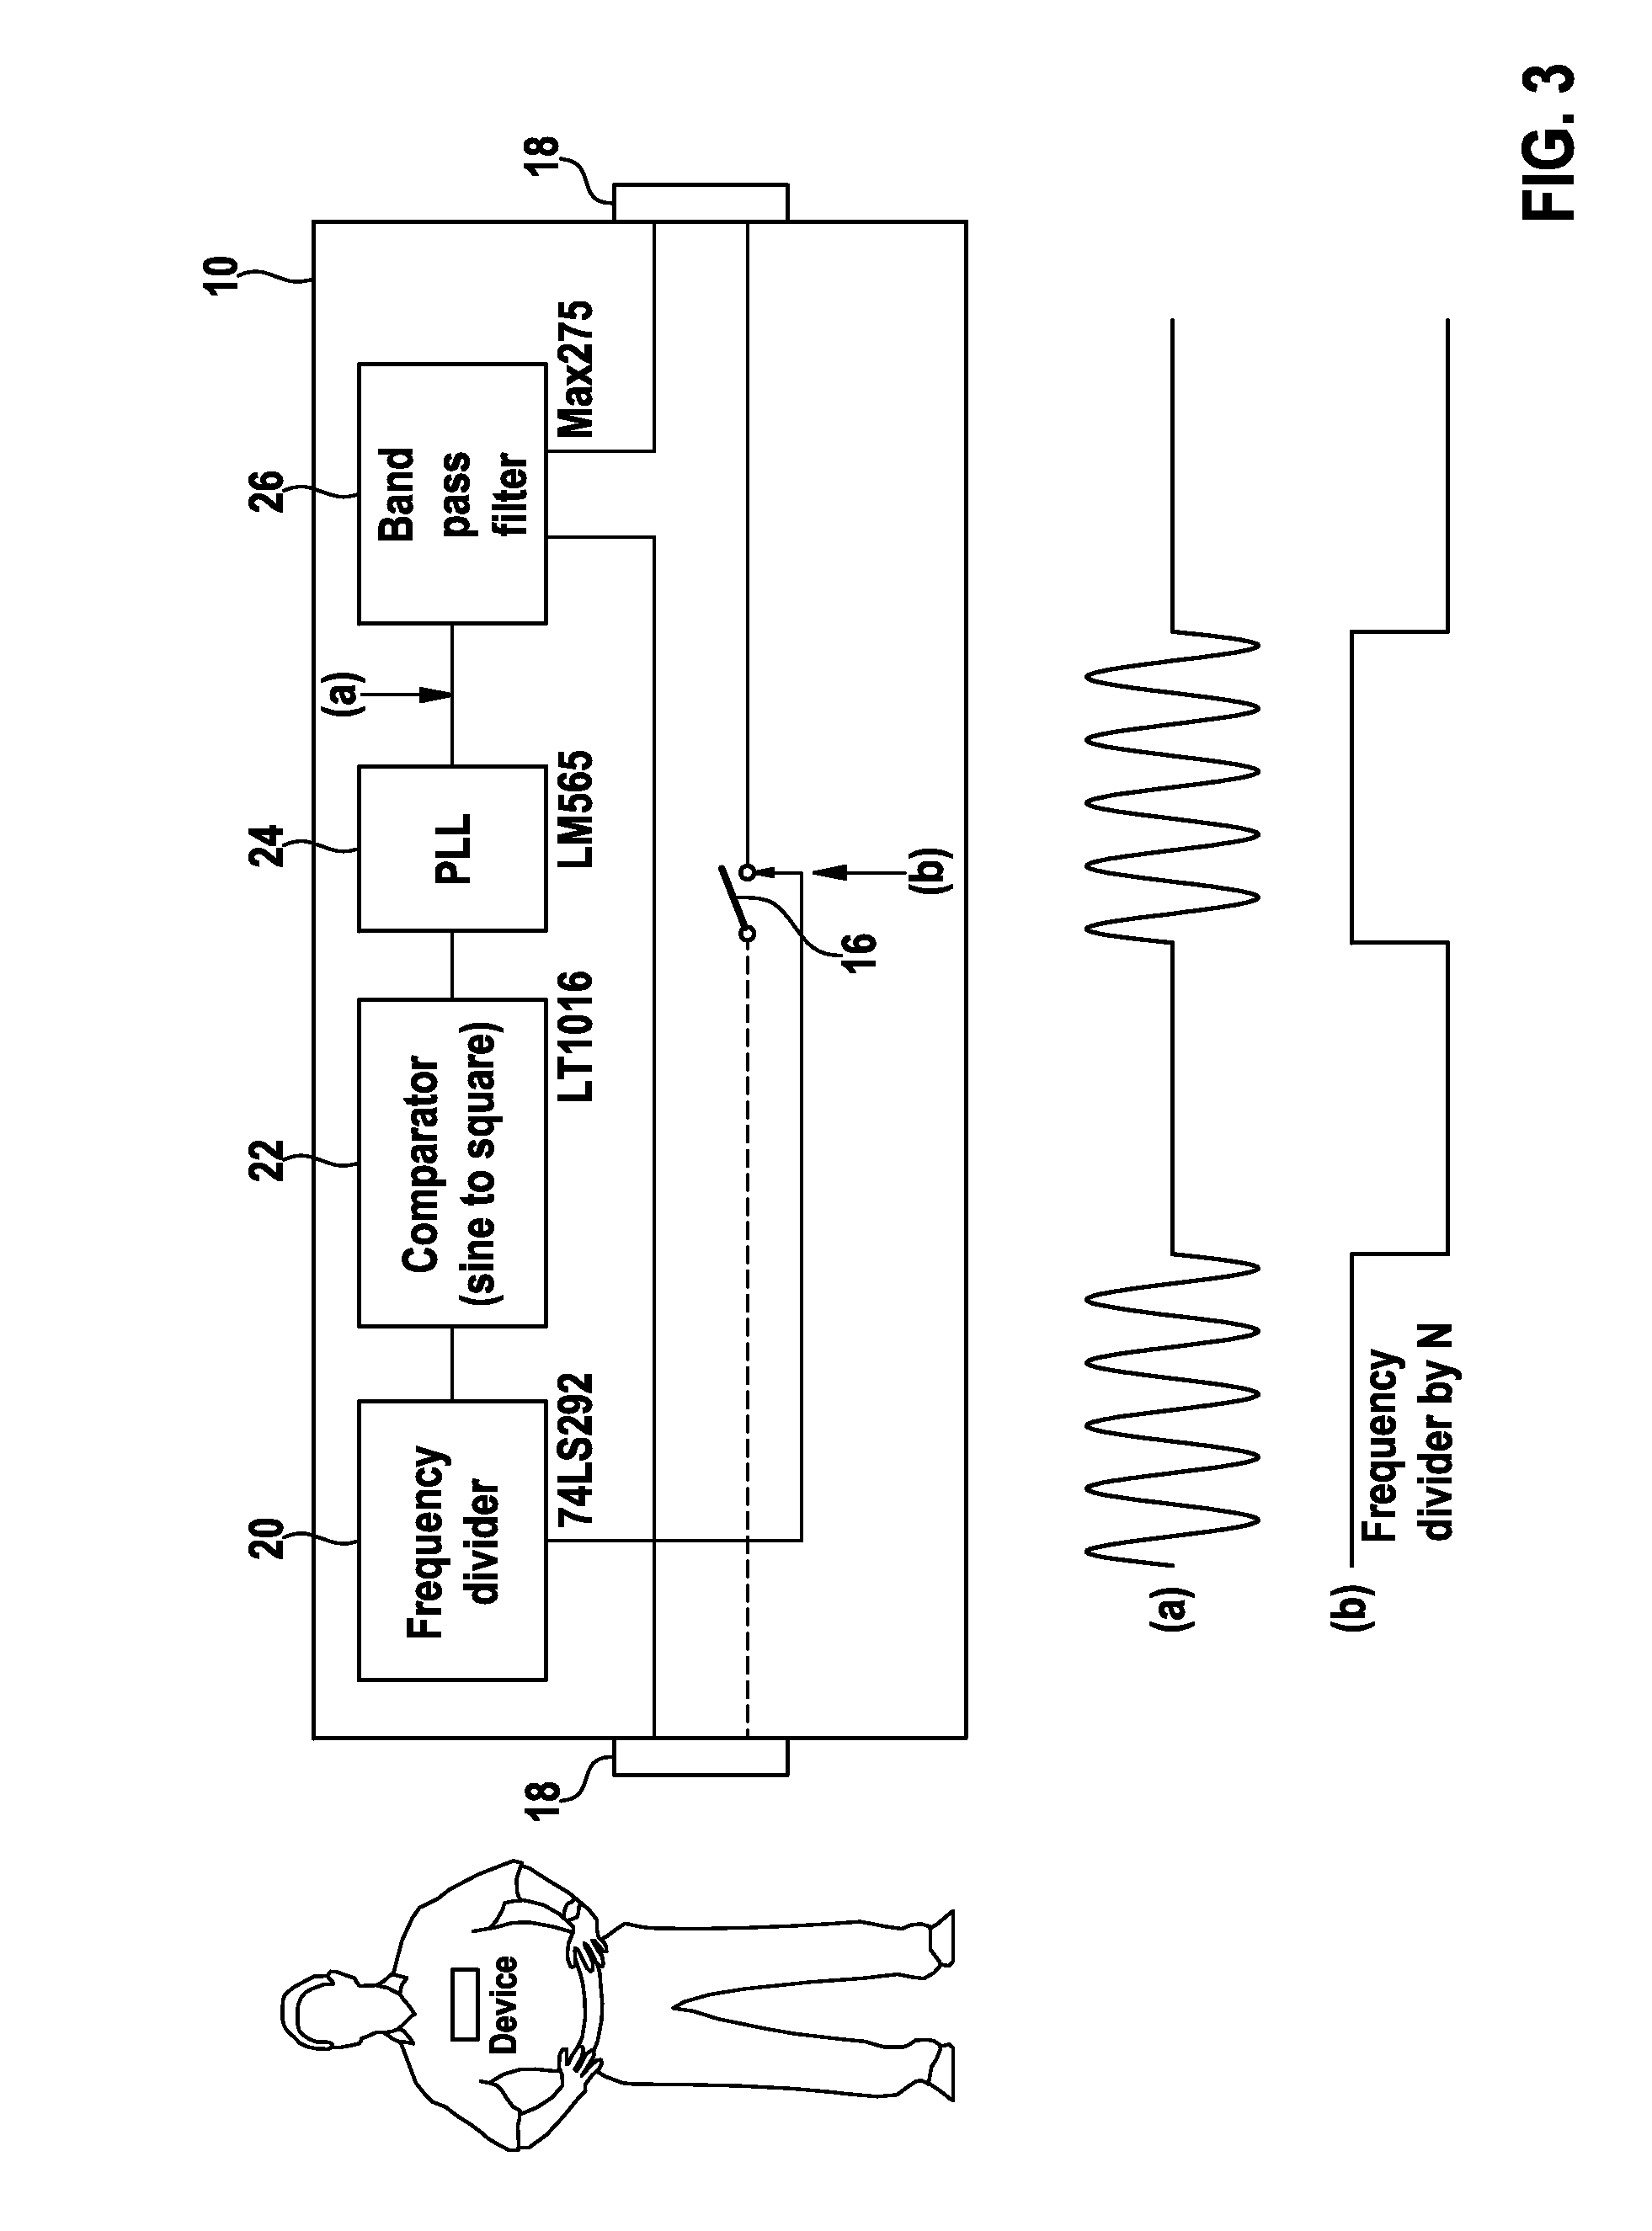 Implantable medical device, medical system and method for data communication